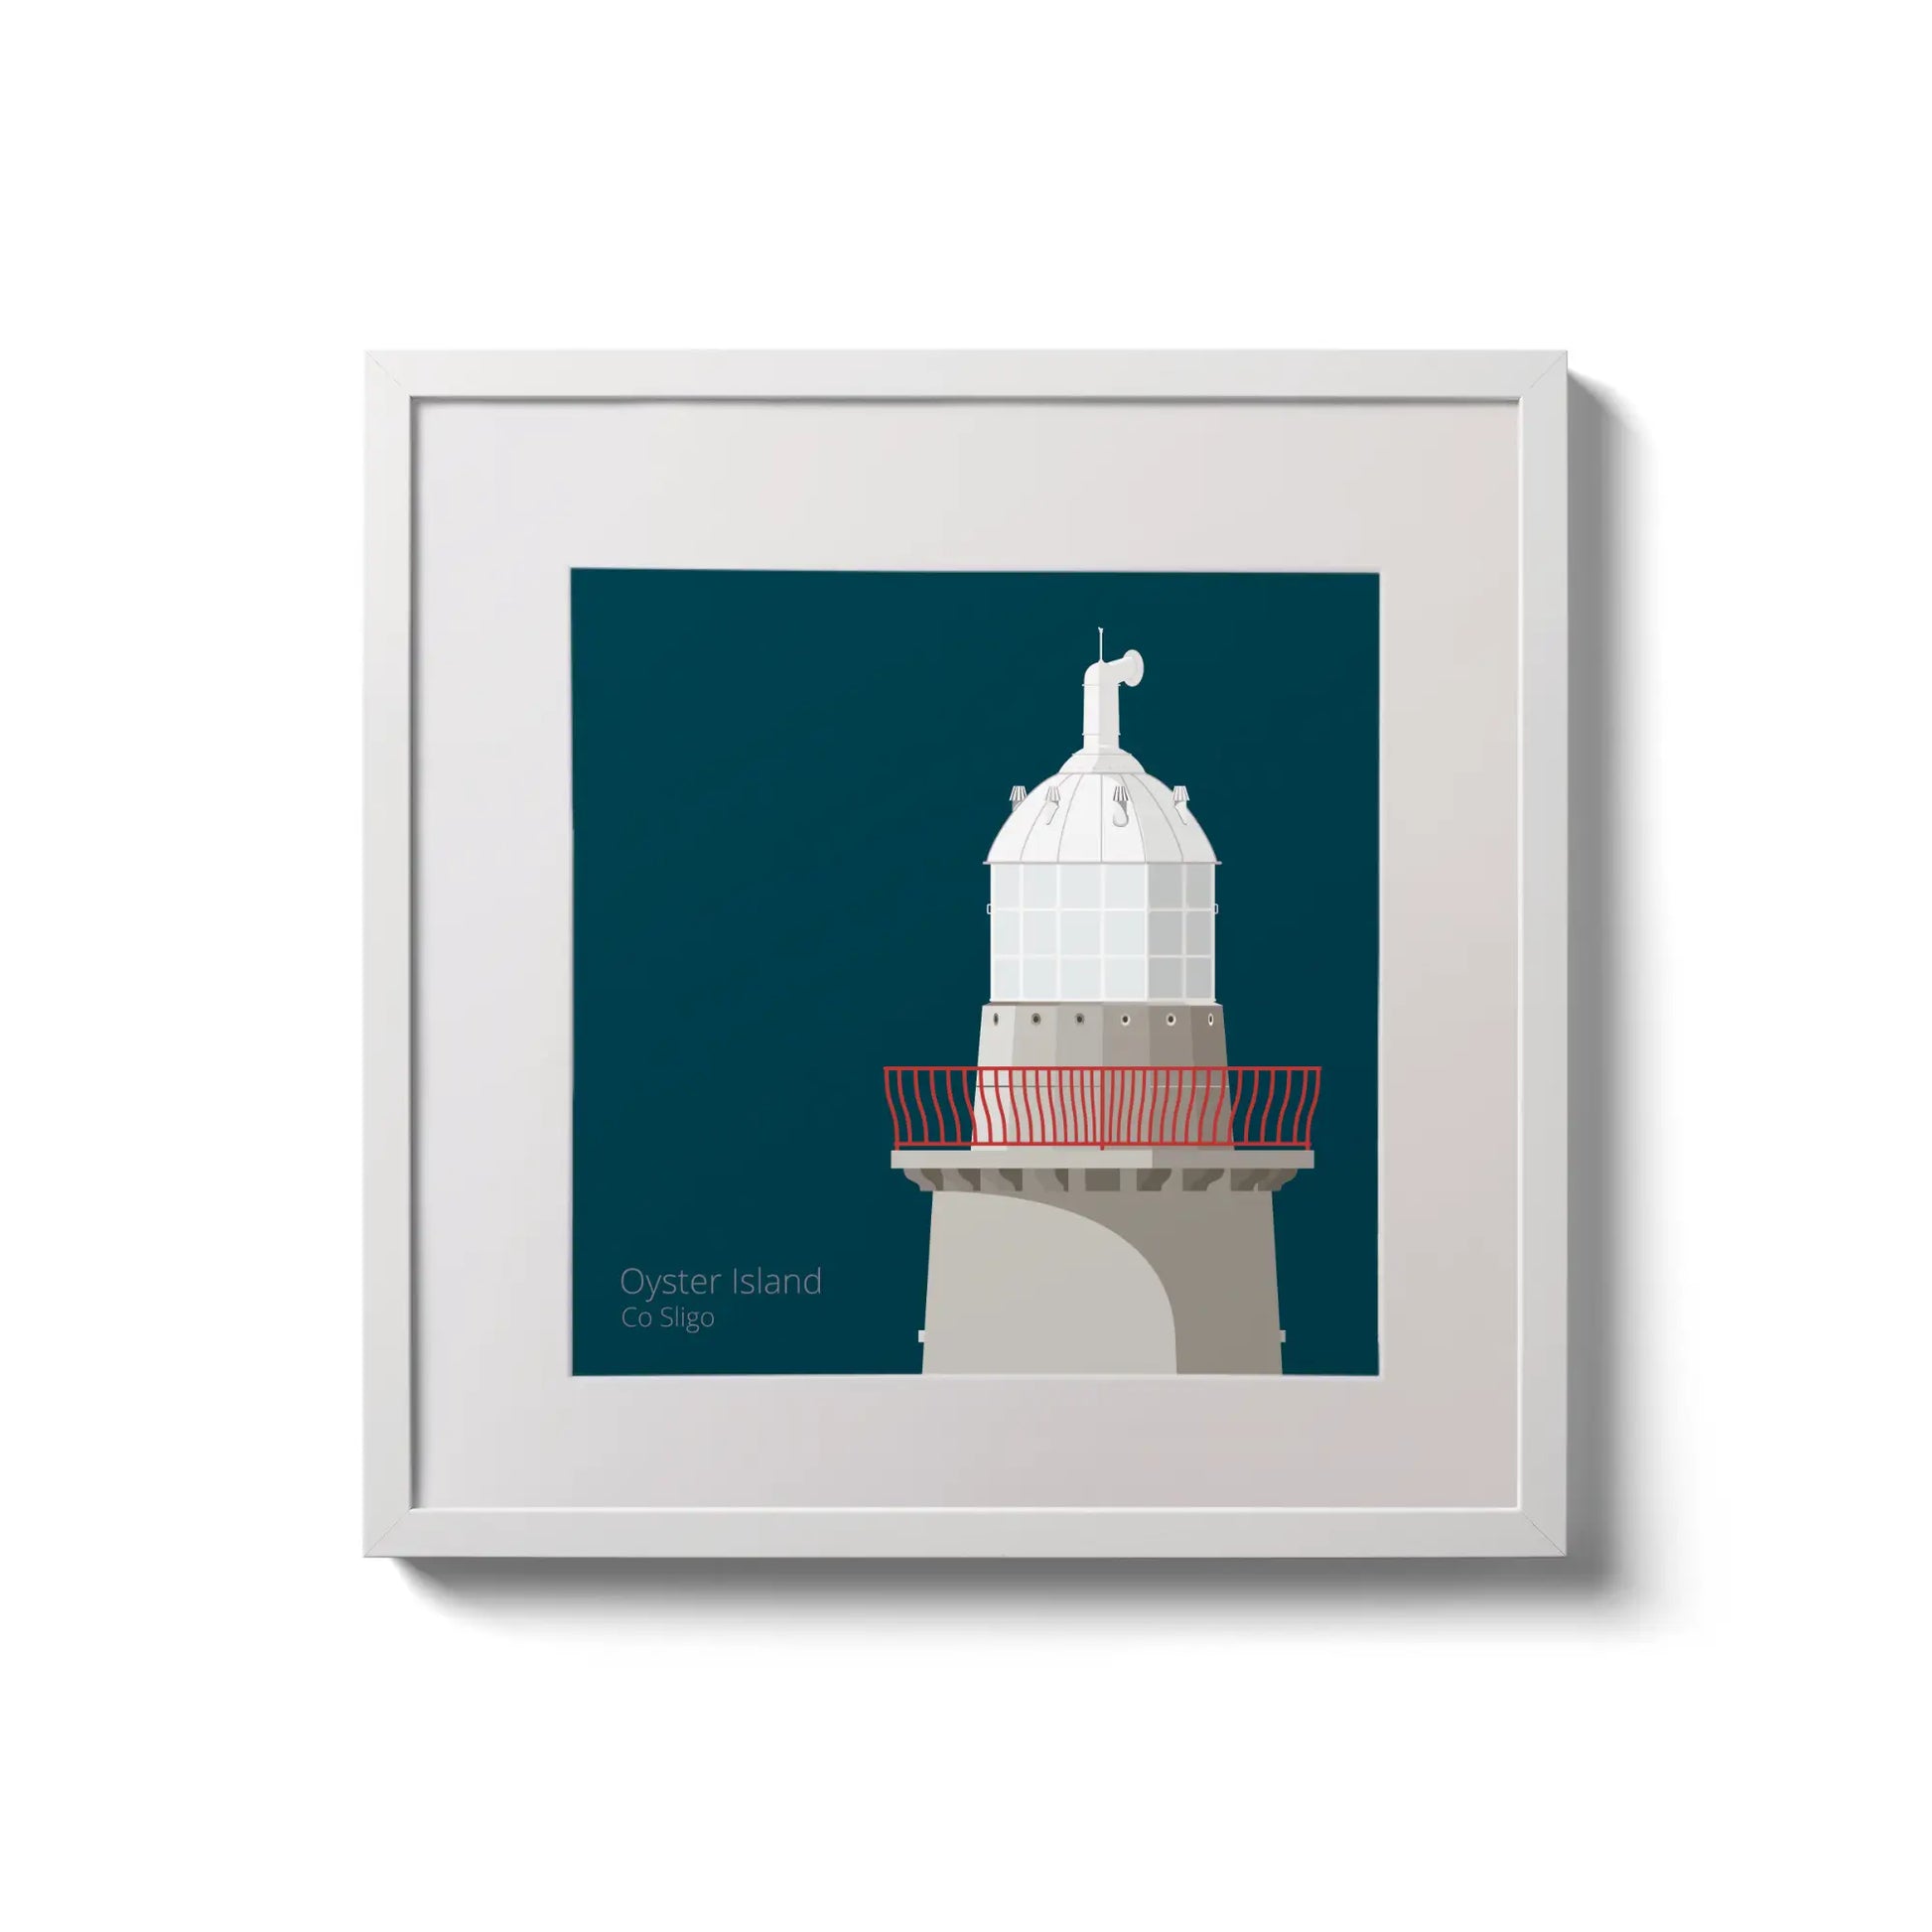 Illustration of Oyster Island lighthouse on a midnight blue background,  in a white square frame measuring 20x20cm.